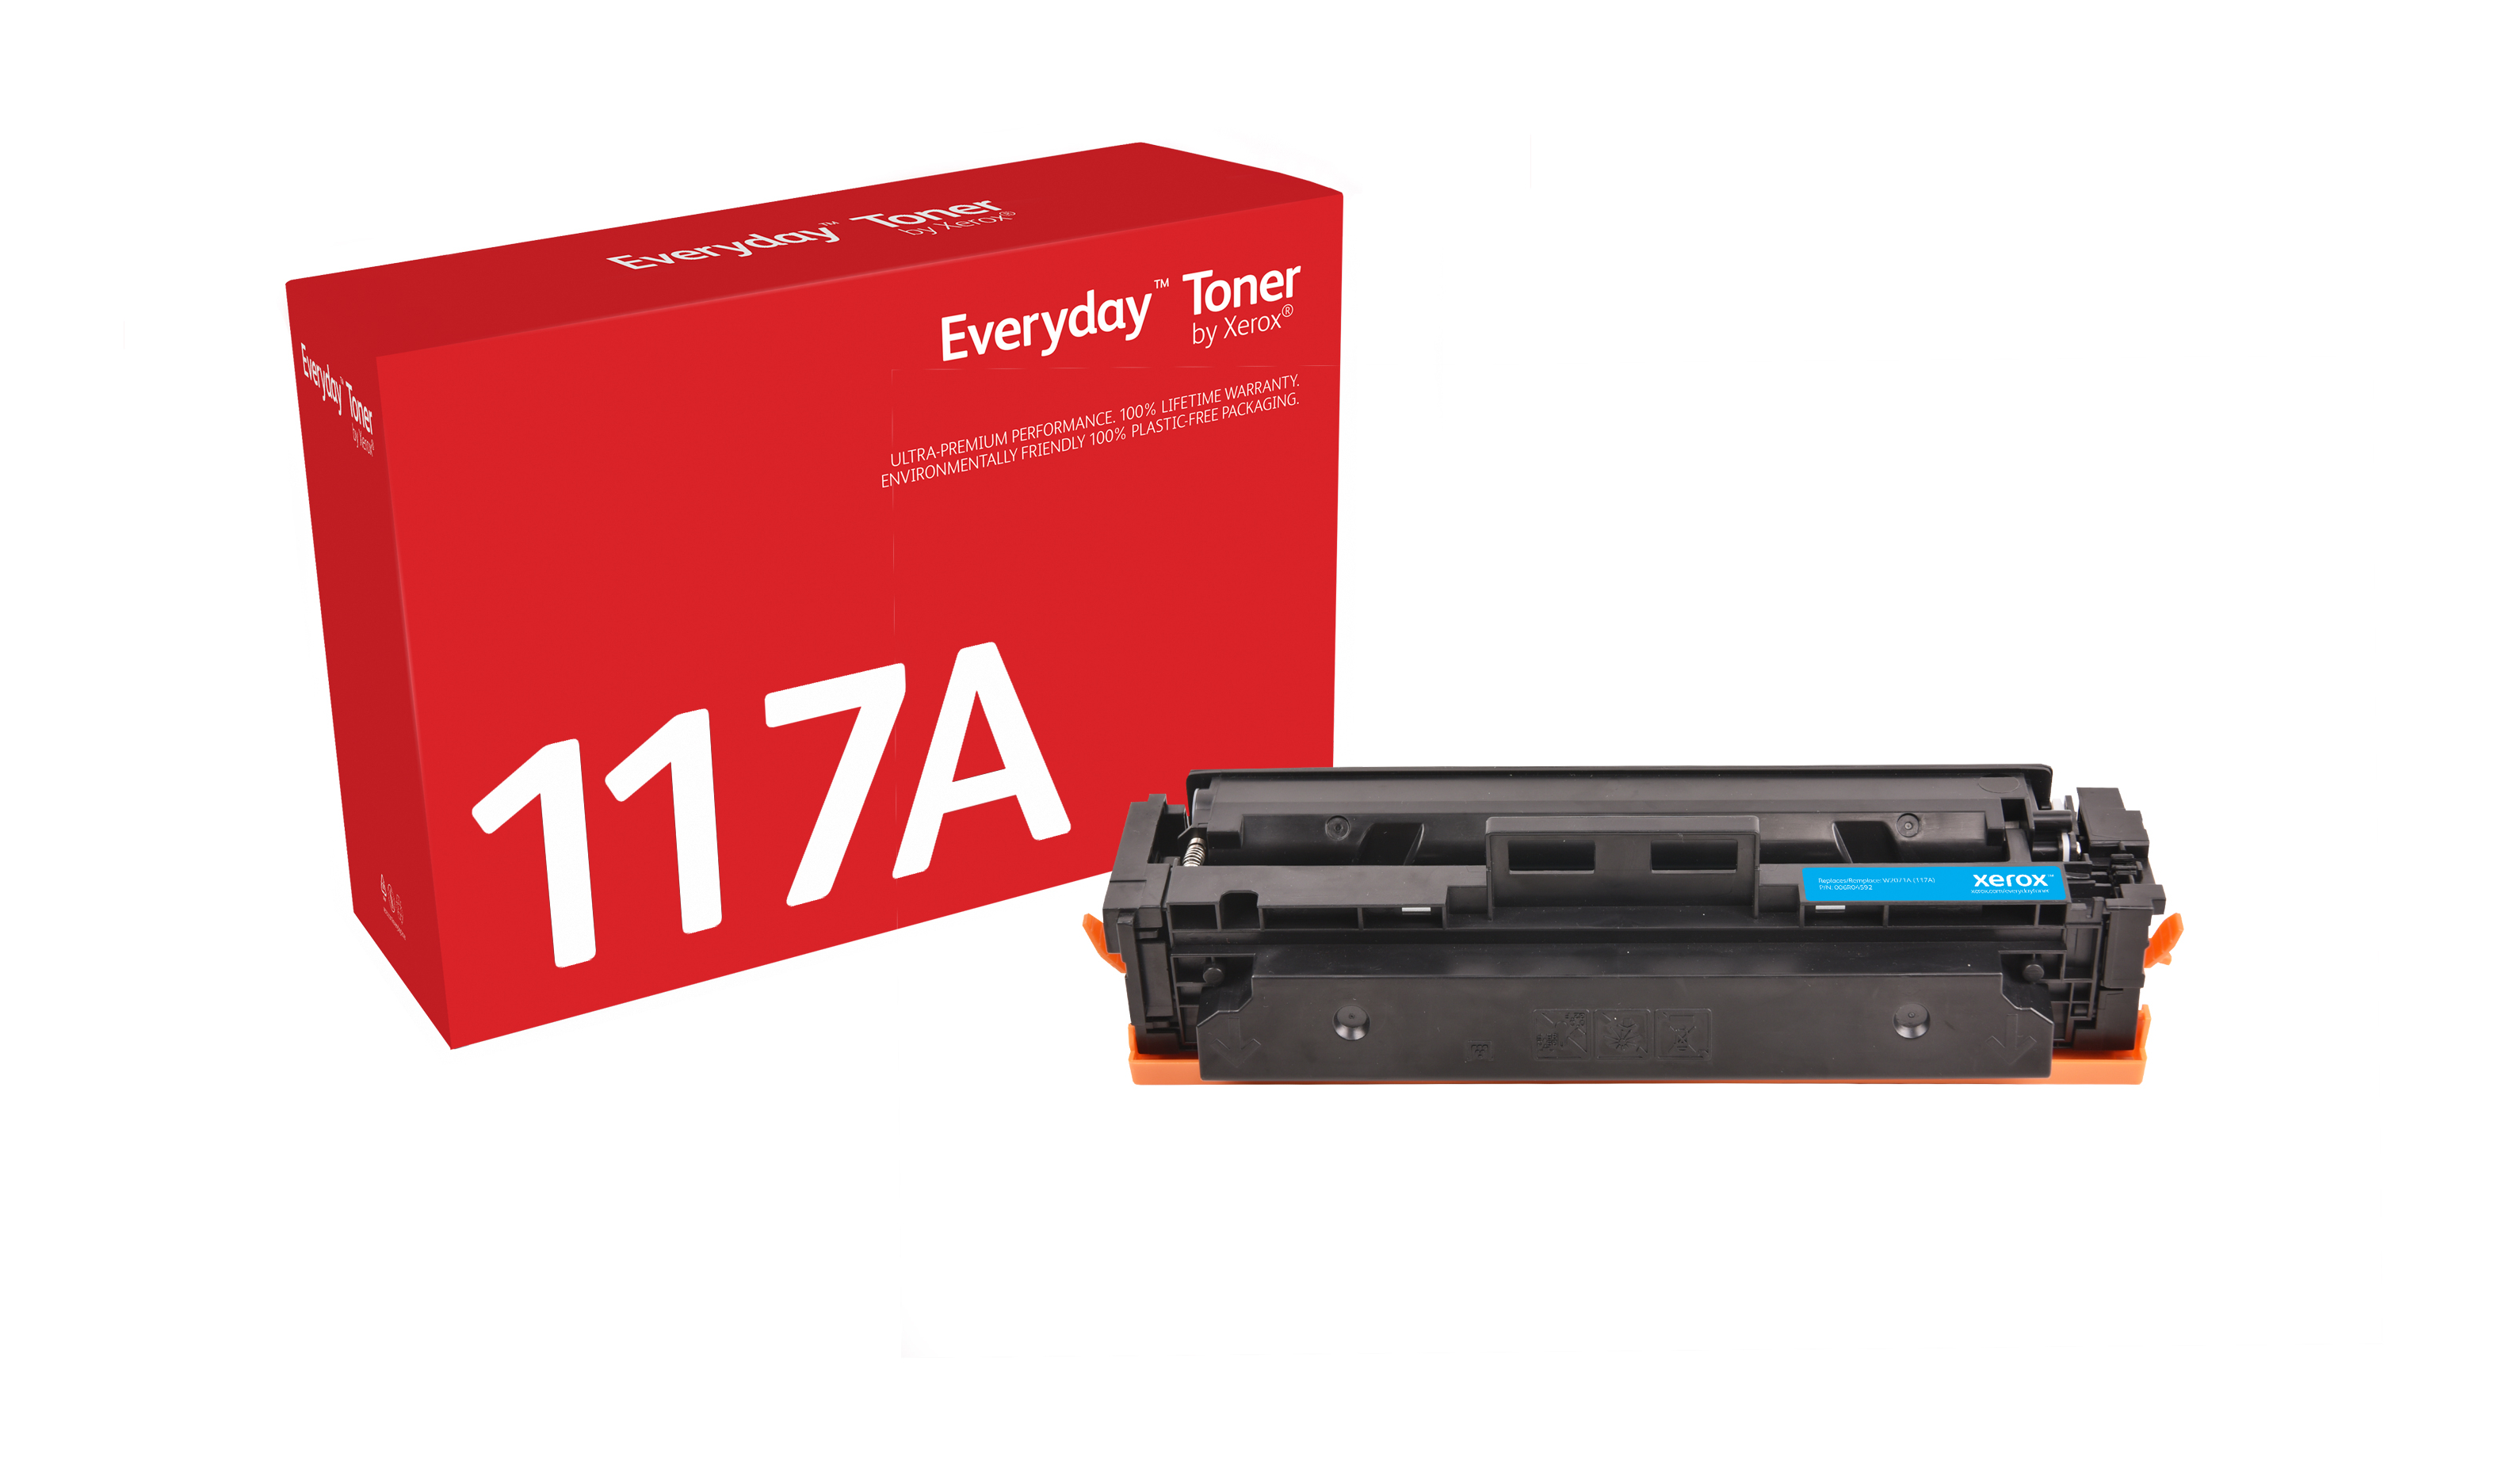 Everyday Cyan Toner compatible with 117A (W2071A), Standard Yield 006R04592 Xerox